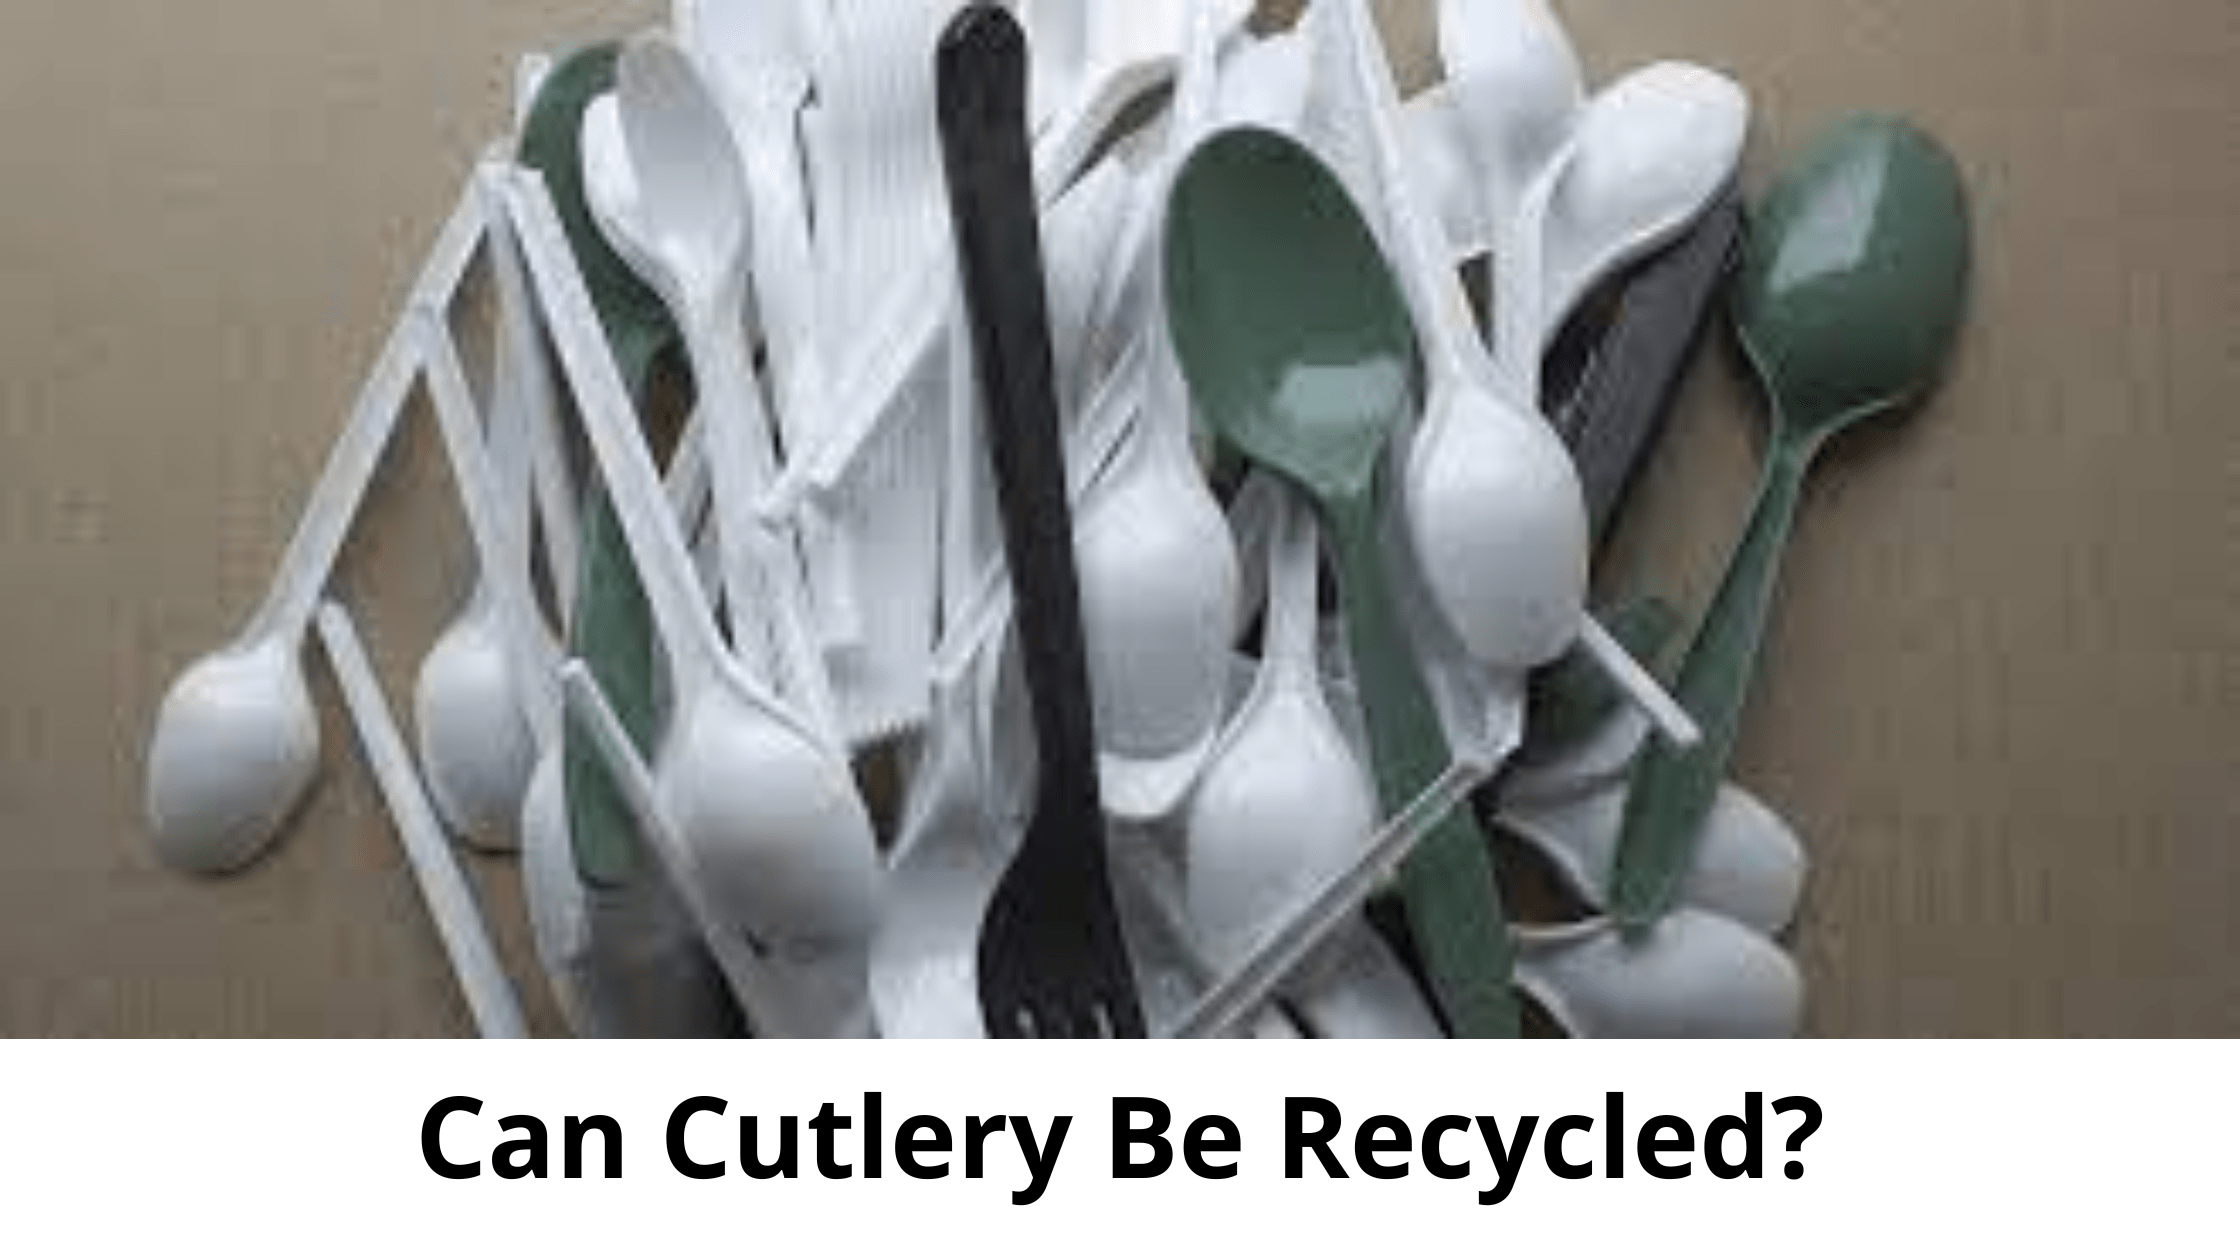 Can Cutlery Be Recycled?